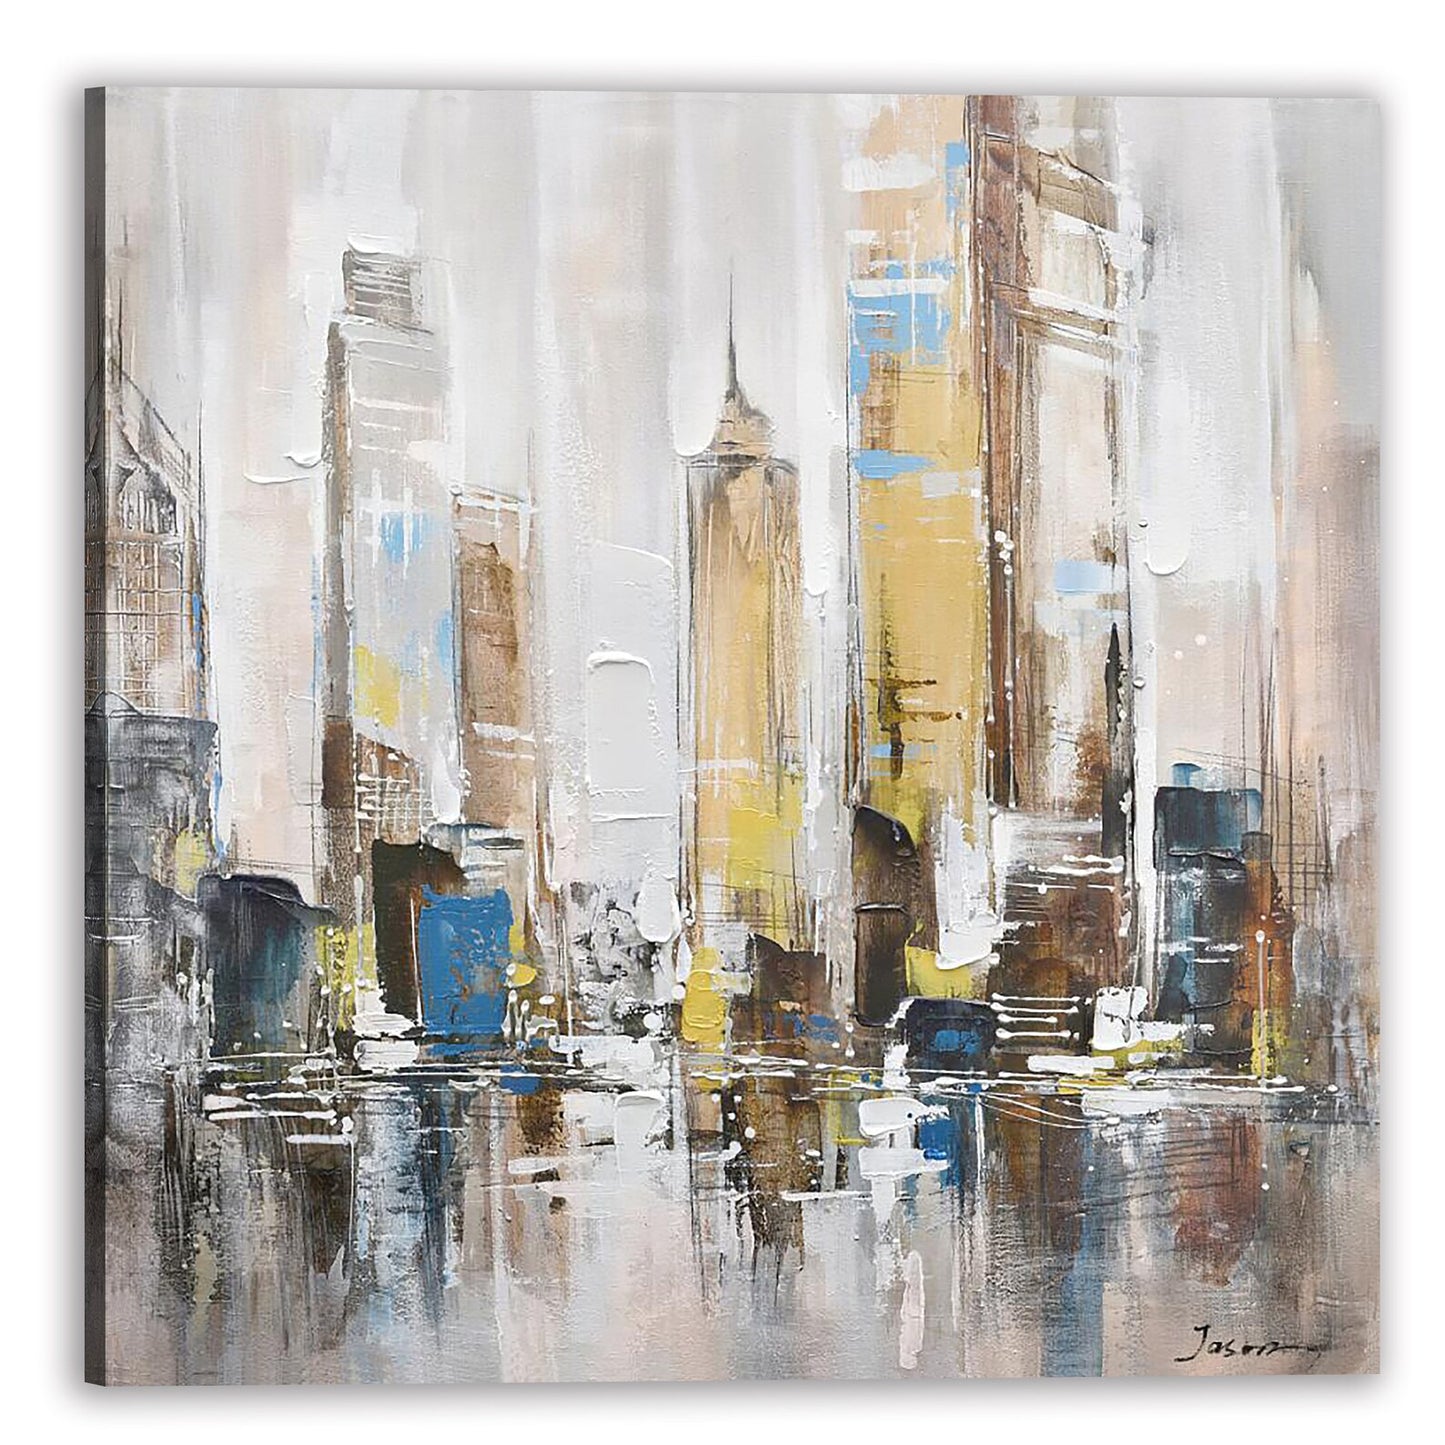 Hand-painted "Splendid city" oil painting original art, Canvas Wall art for living room, bedroom, office - Wrapped Canvas Painting